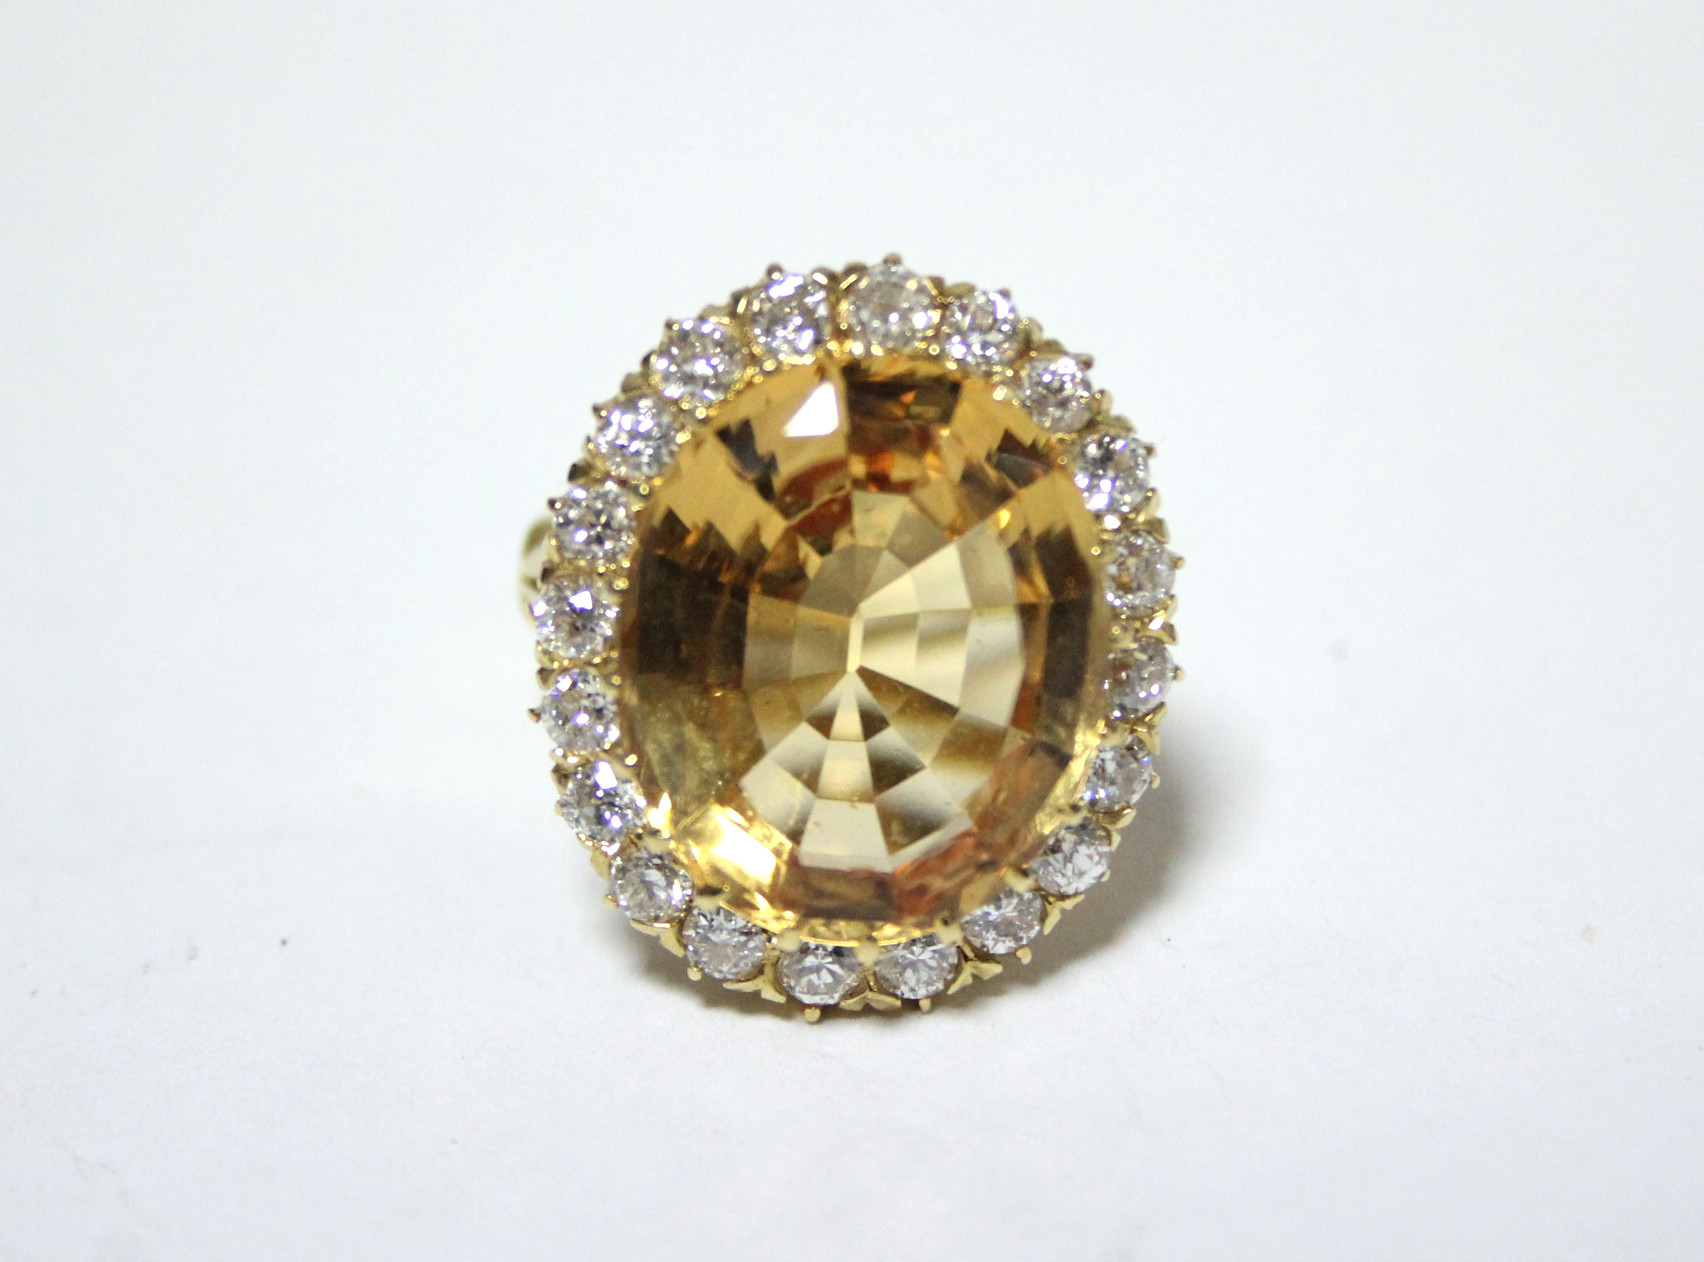 AN 18ct. GOLD, TOPAZ, & DIAMOND RING, the large oval topaz measuring approx. 19mm x 15mm, set within